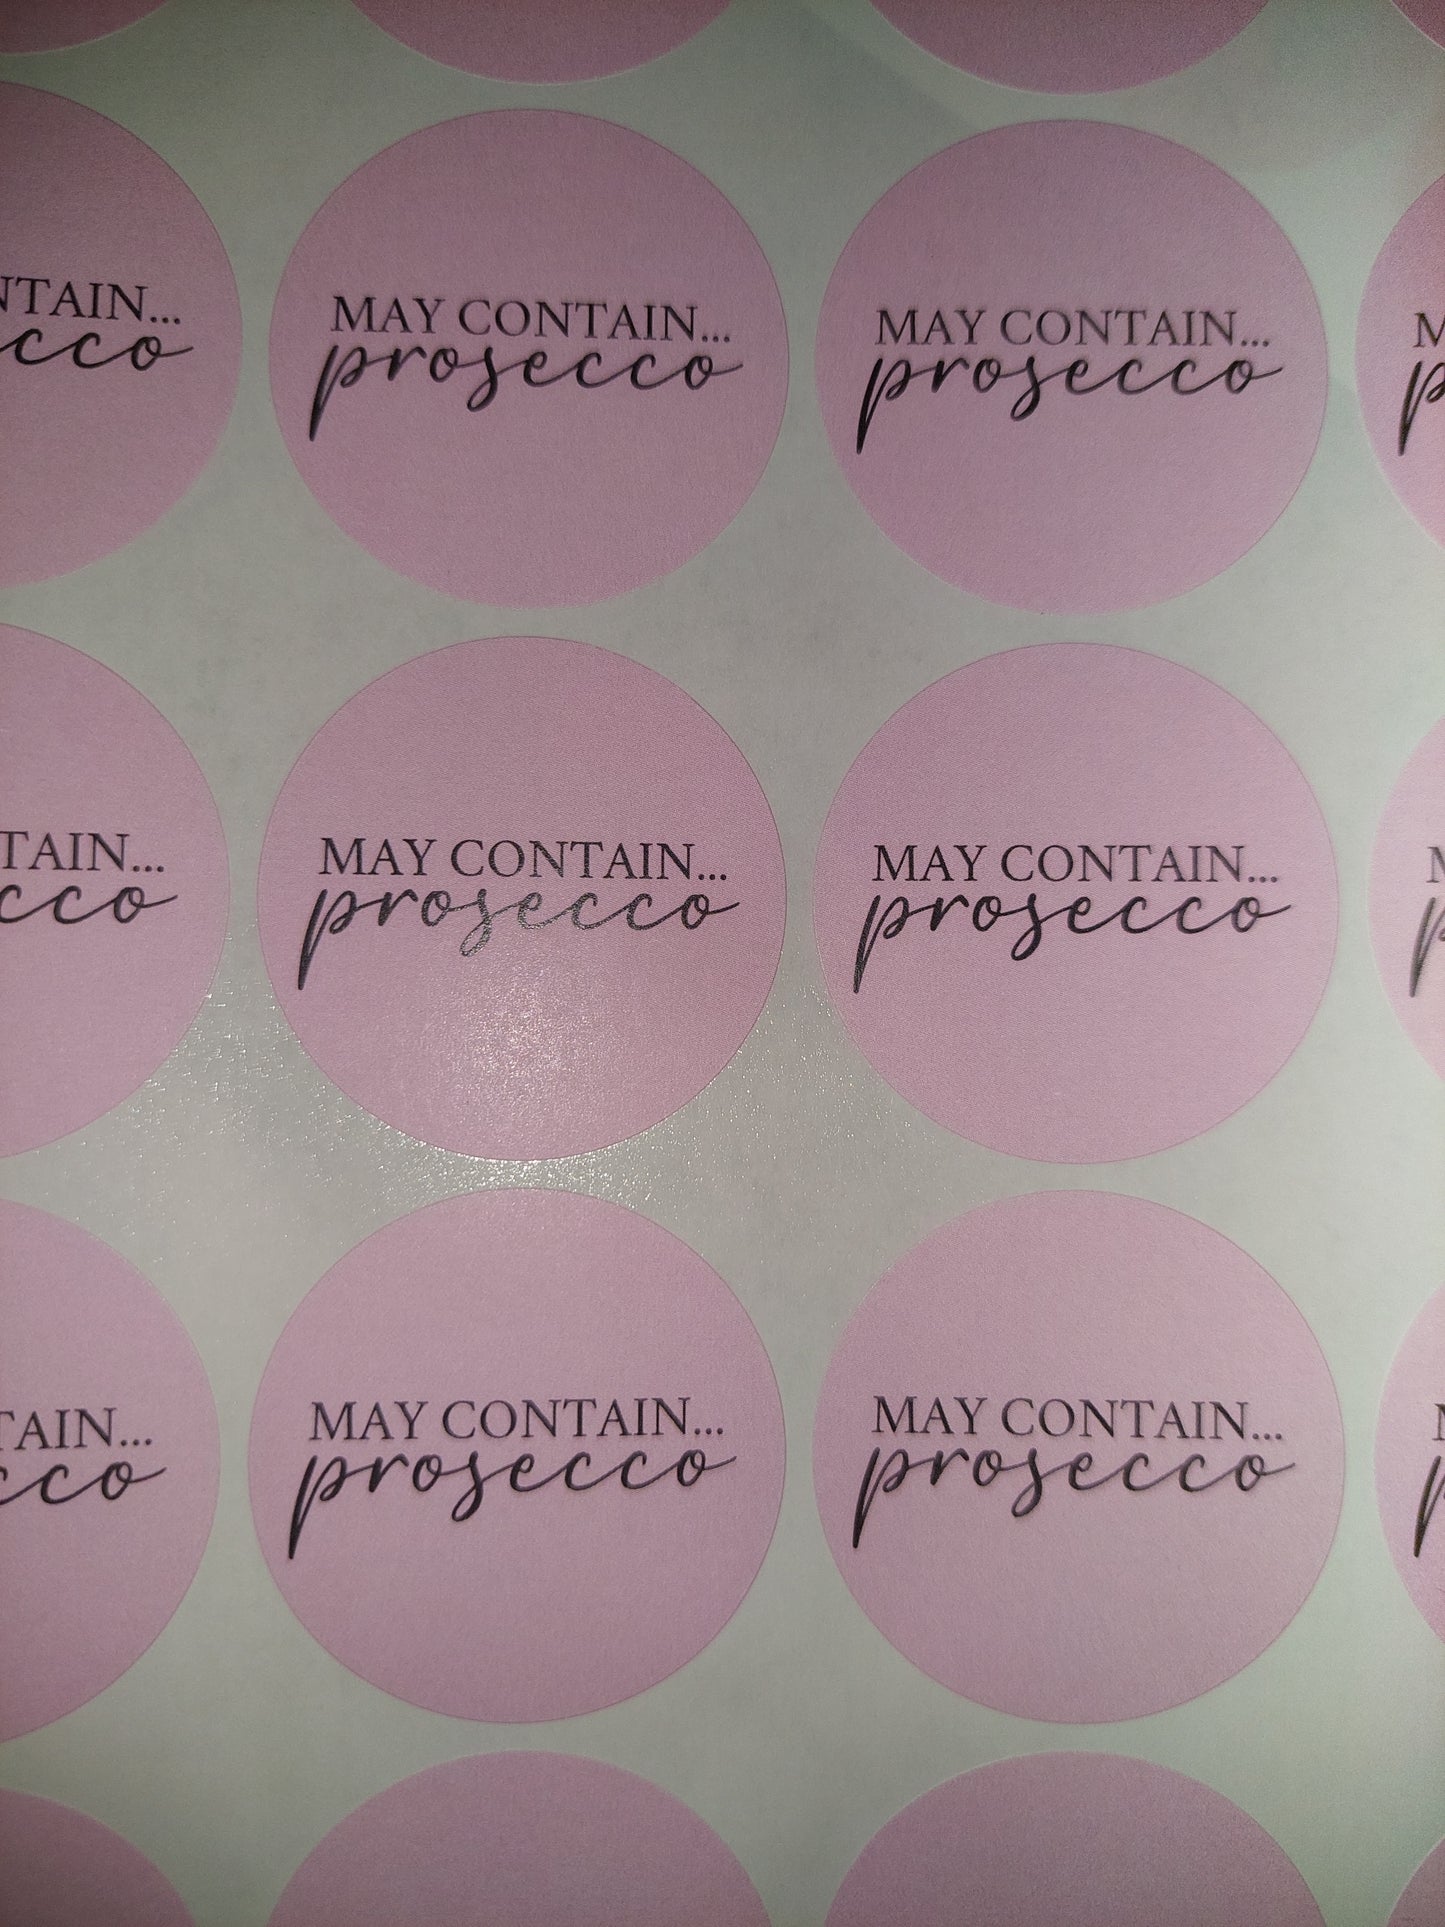 Prosecco Stickers | May Contain Prosecco | Sticker Sheet 45mm Circles | Party Stickers | Circle Stickers | Sticker Sheet